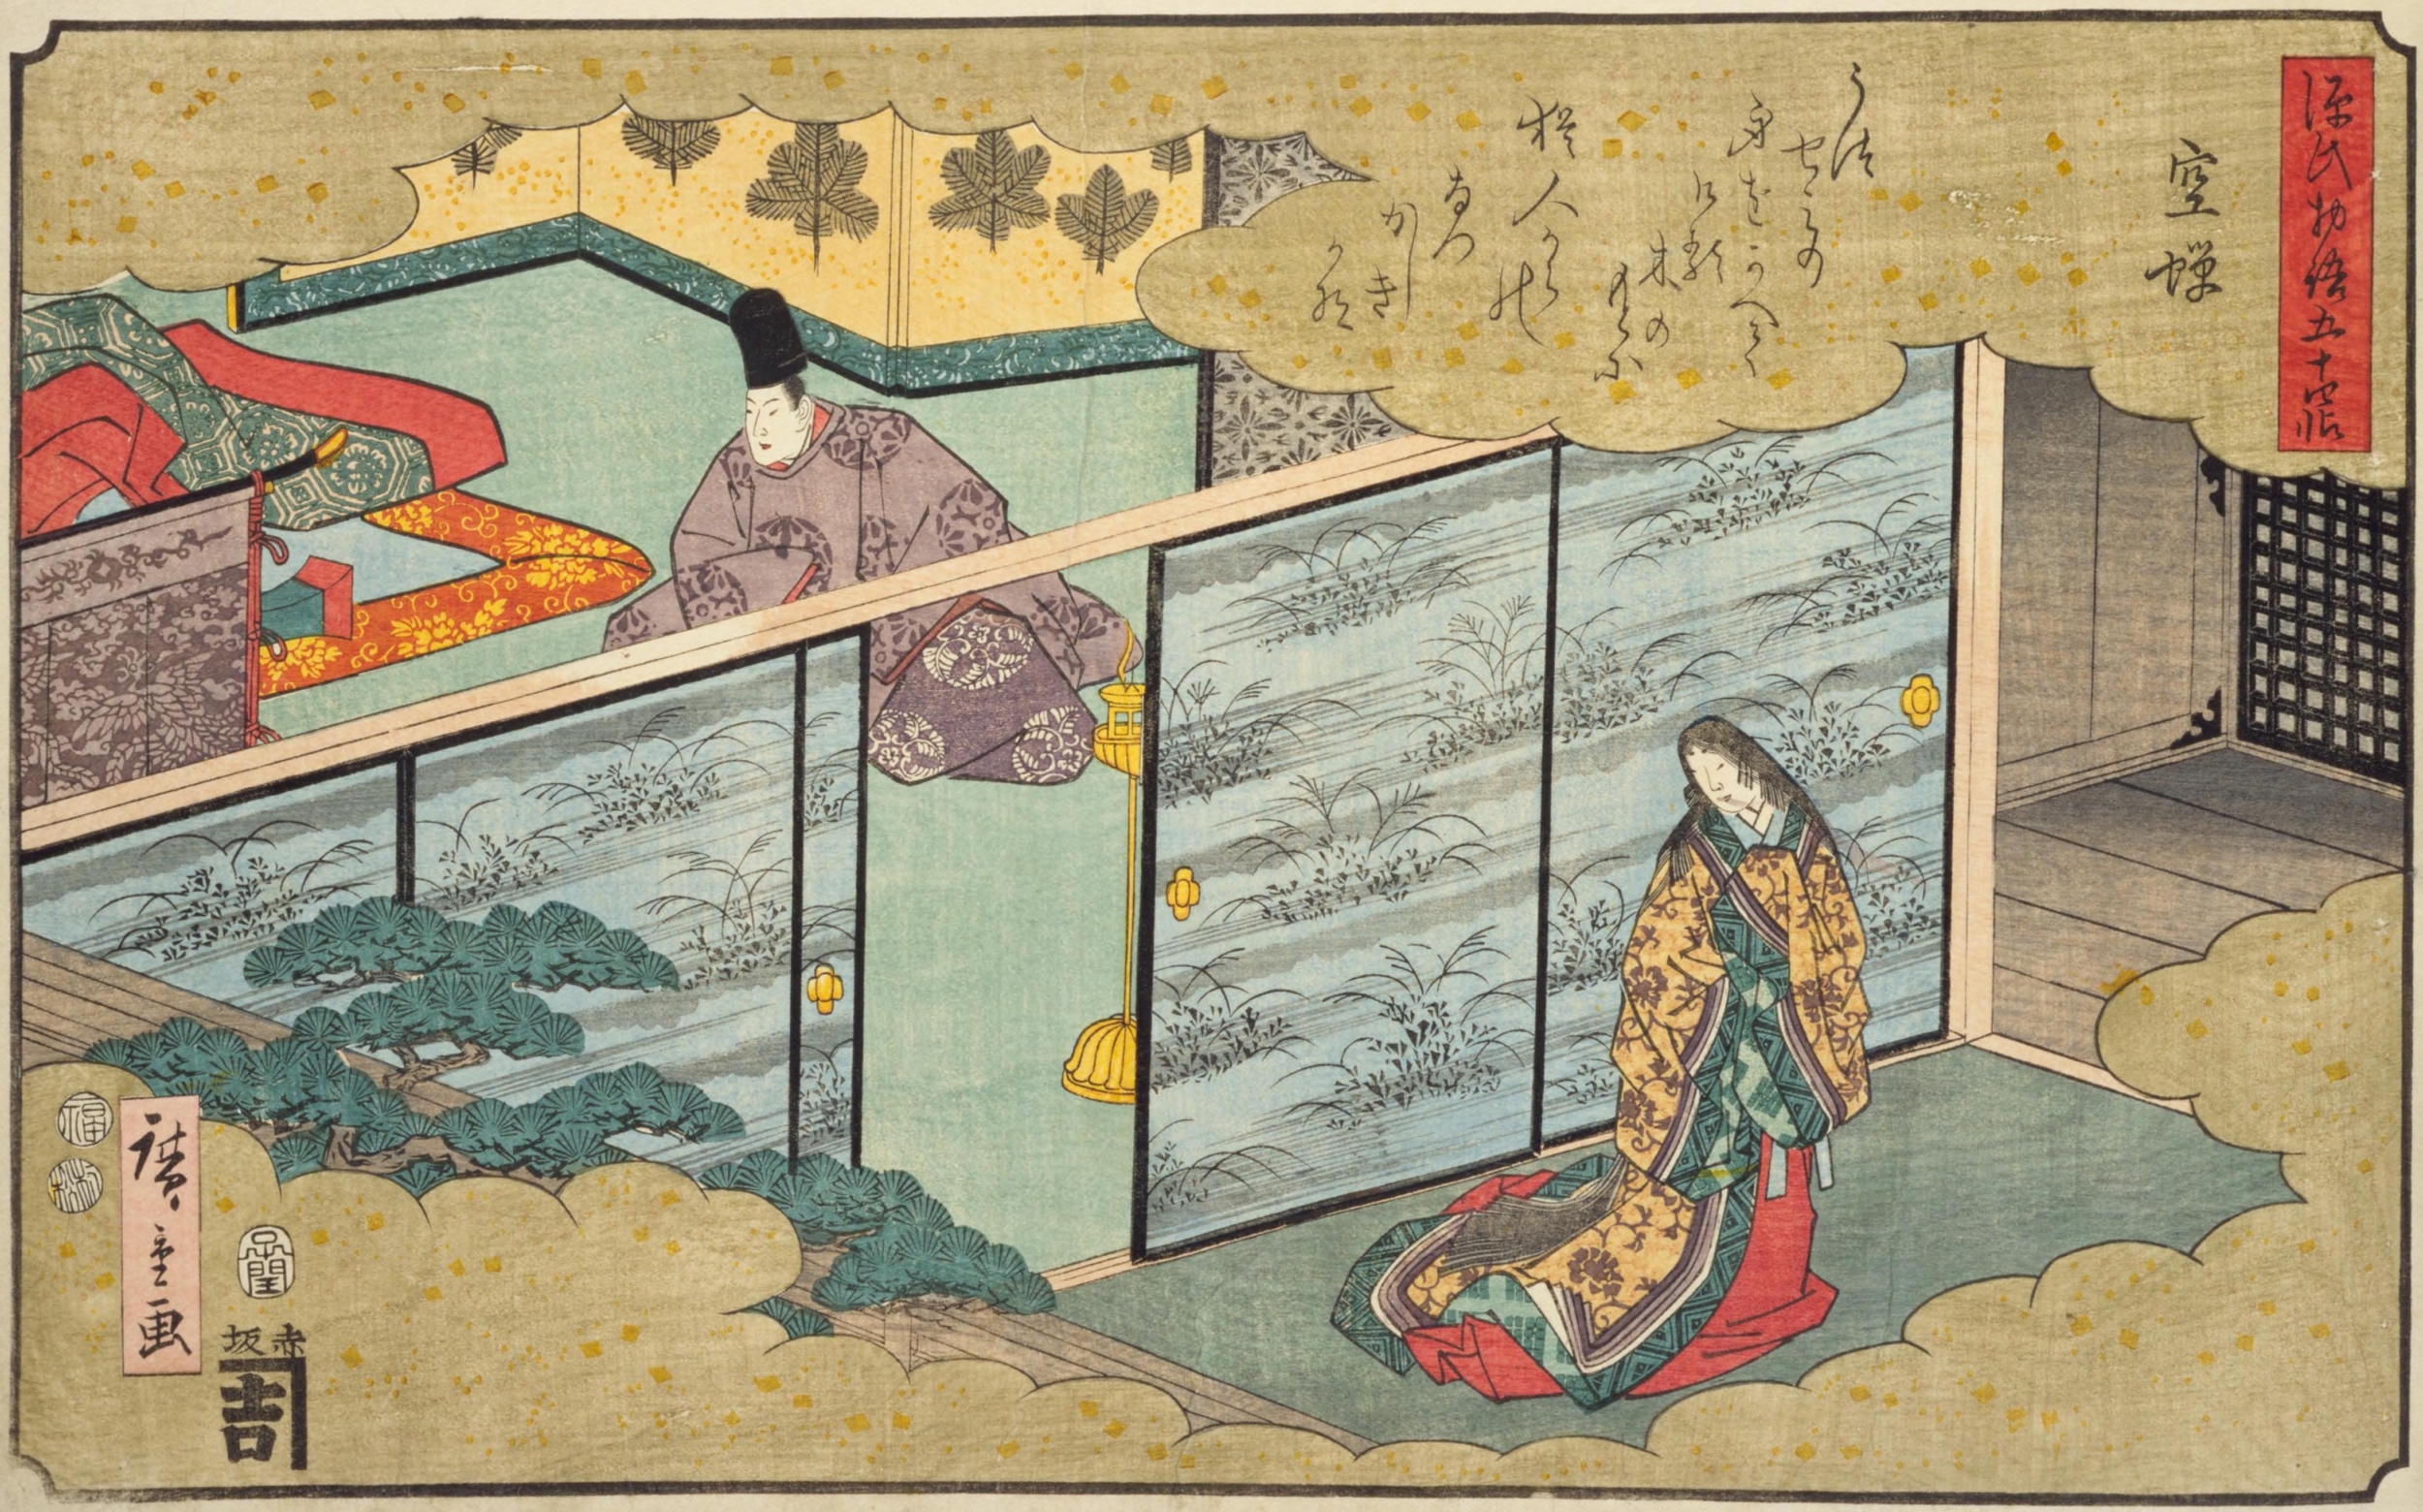 From Princesses to Pop Culture: Bryn Mawr Special Collections’ New Exhibition on the Tale of Genji